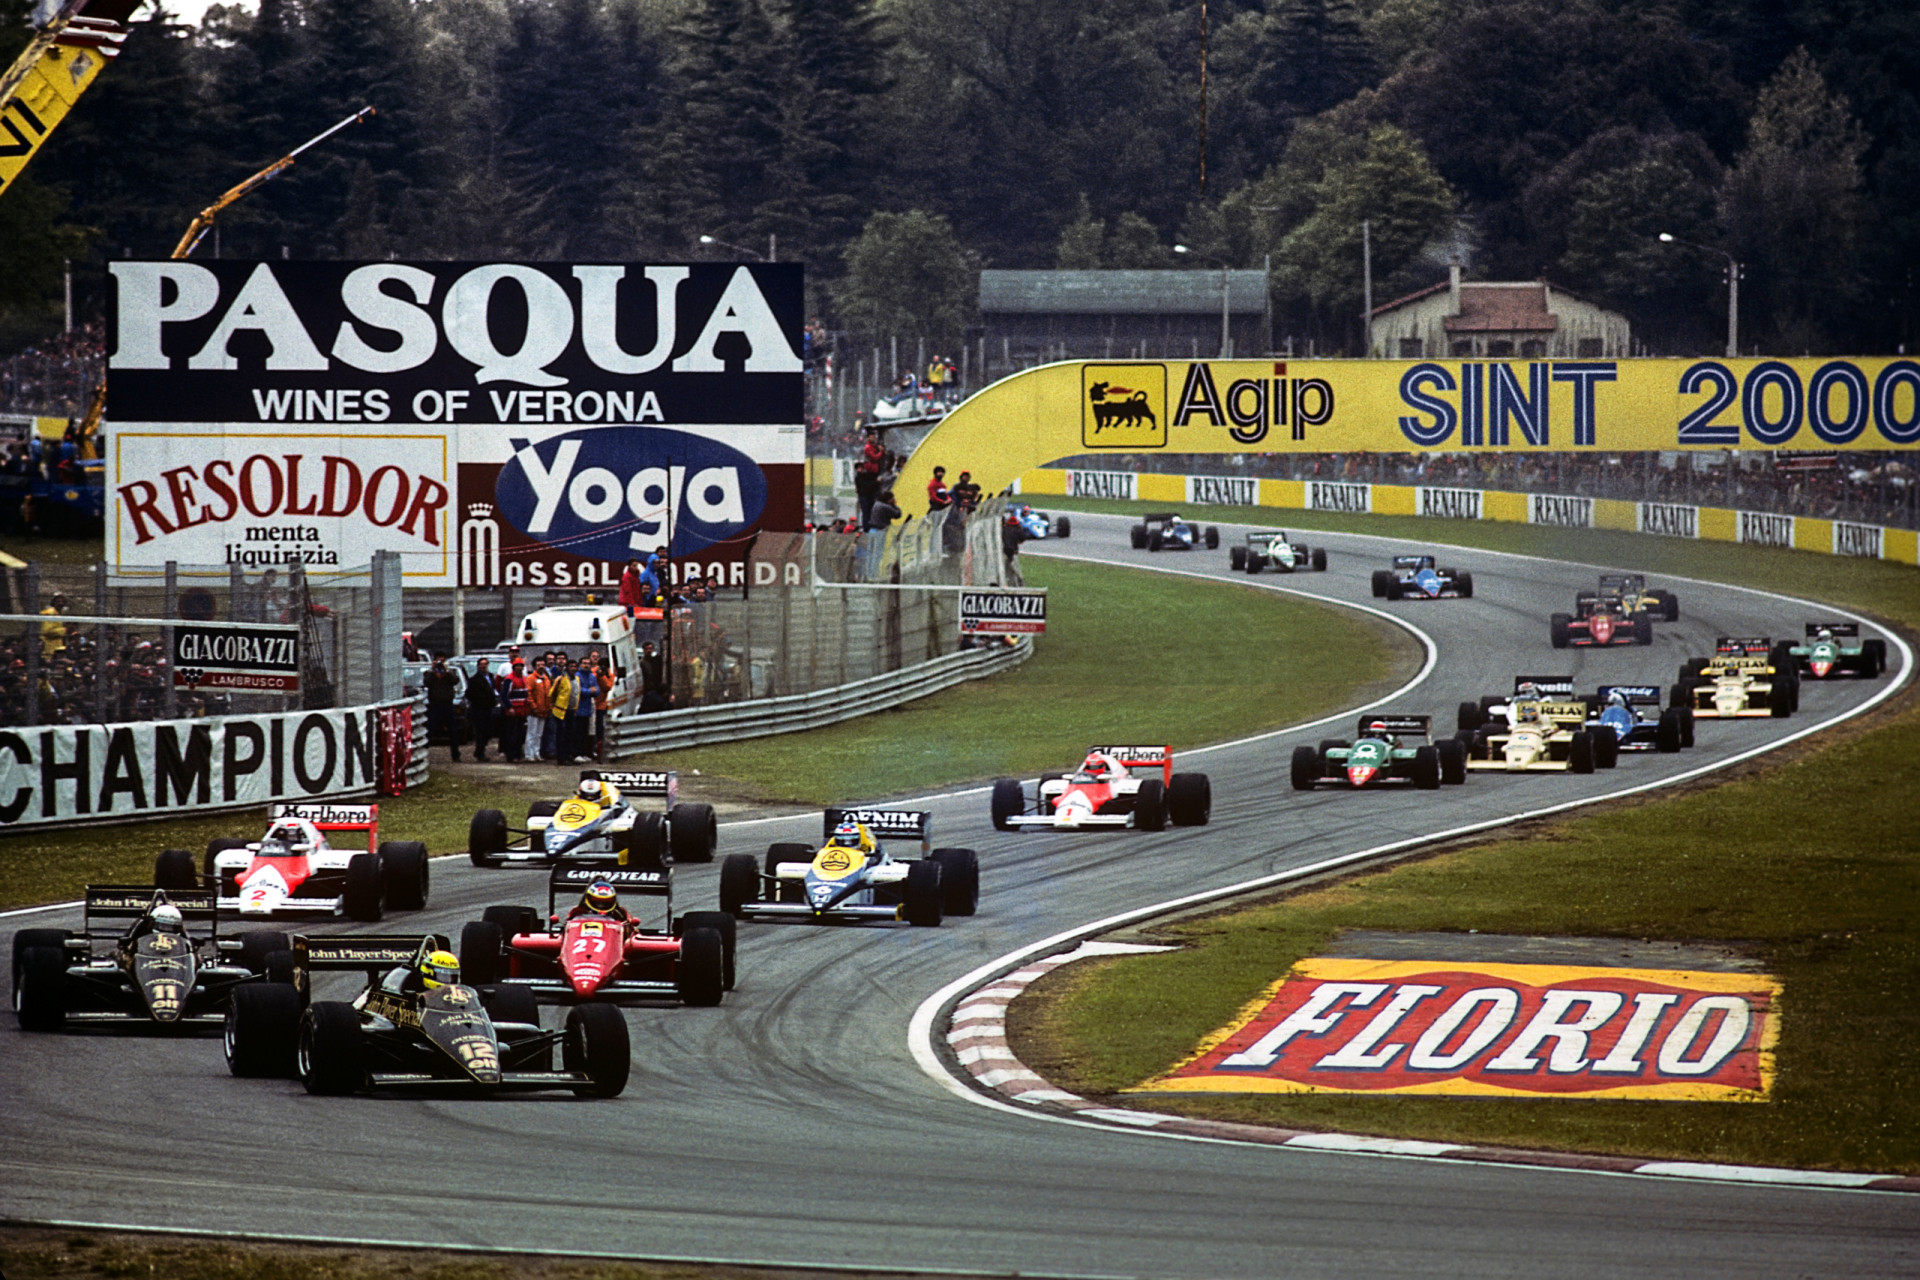 <p>Seven pole positions in 1985 cemented his reputation as F1's foremost qualifier. He's pictured leading the cars at the Grand Prix of Europe at Imola on May 5, 1985.</p><p><a href="https://www.msn.com/en-us/community/channel/vid-7xx8mnucu55yw63we9va2gwr7uihbxwc68fxqp25x6tg4ftibpra?cvid=94631541bc0f4f89bfd59158d696ad7e">Follow us and access great exclusive content every day</a></p>